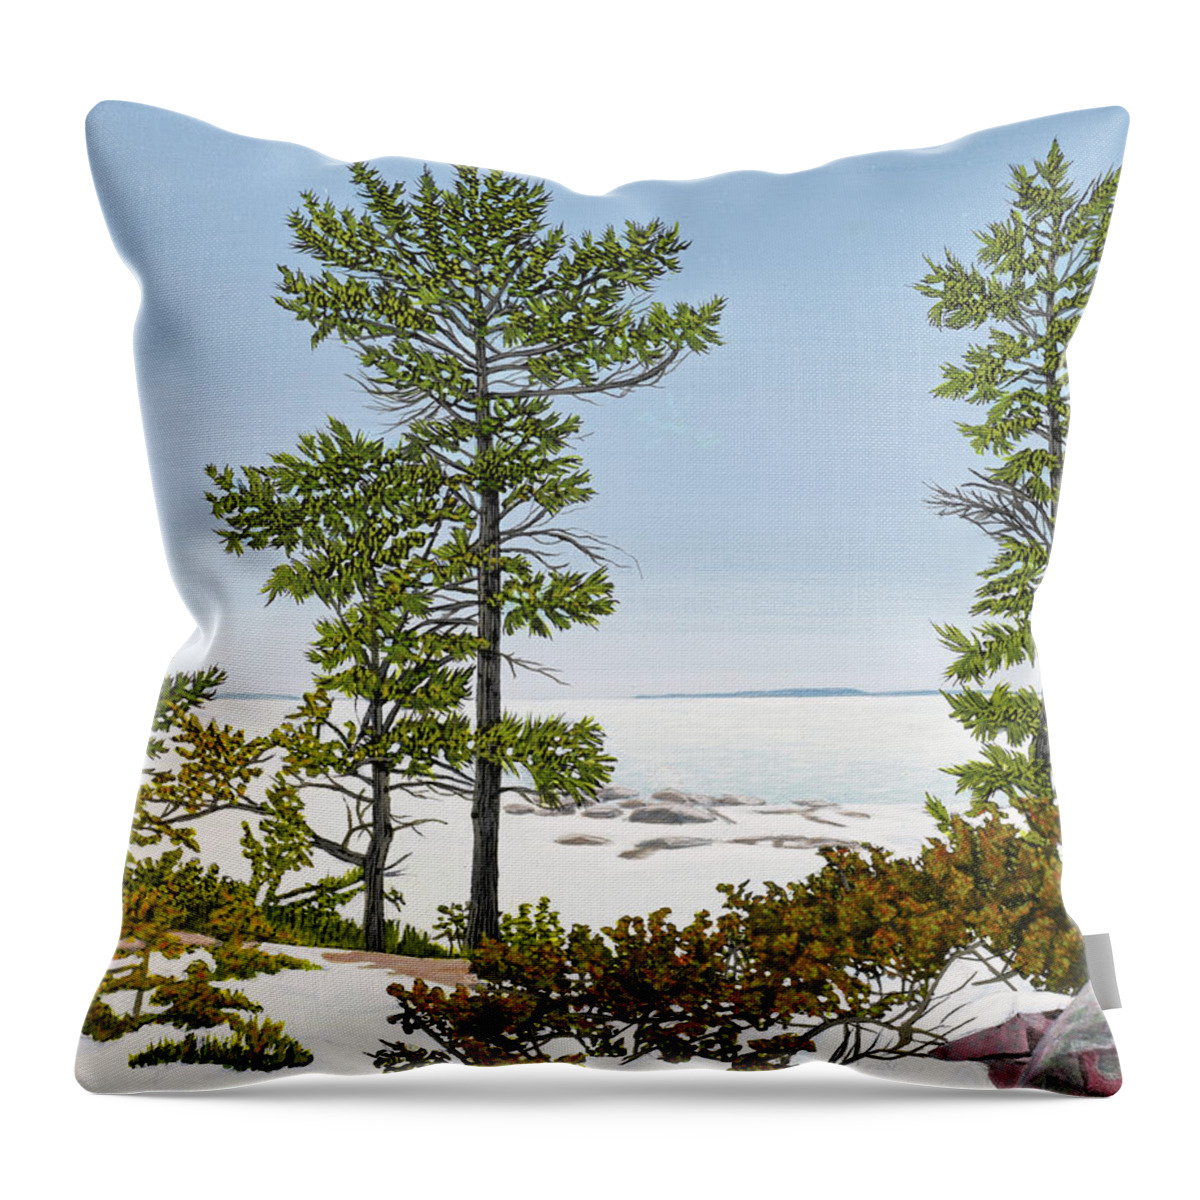 Georgian Bay Throw Pillow featuring the painting Chikanishing Winter by Kenneth M Kirsch